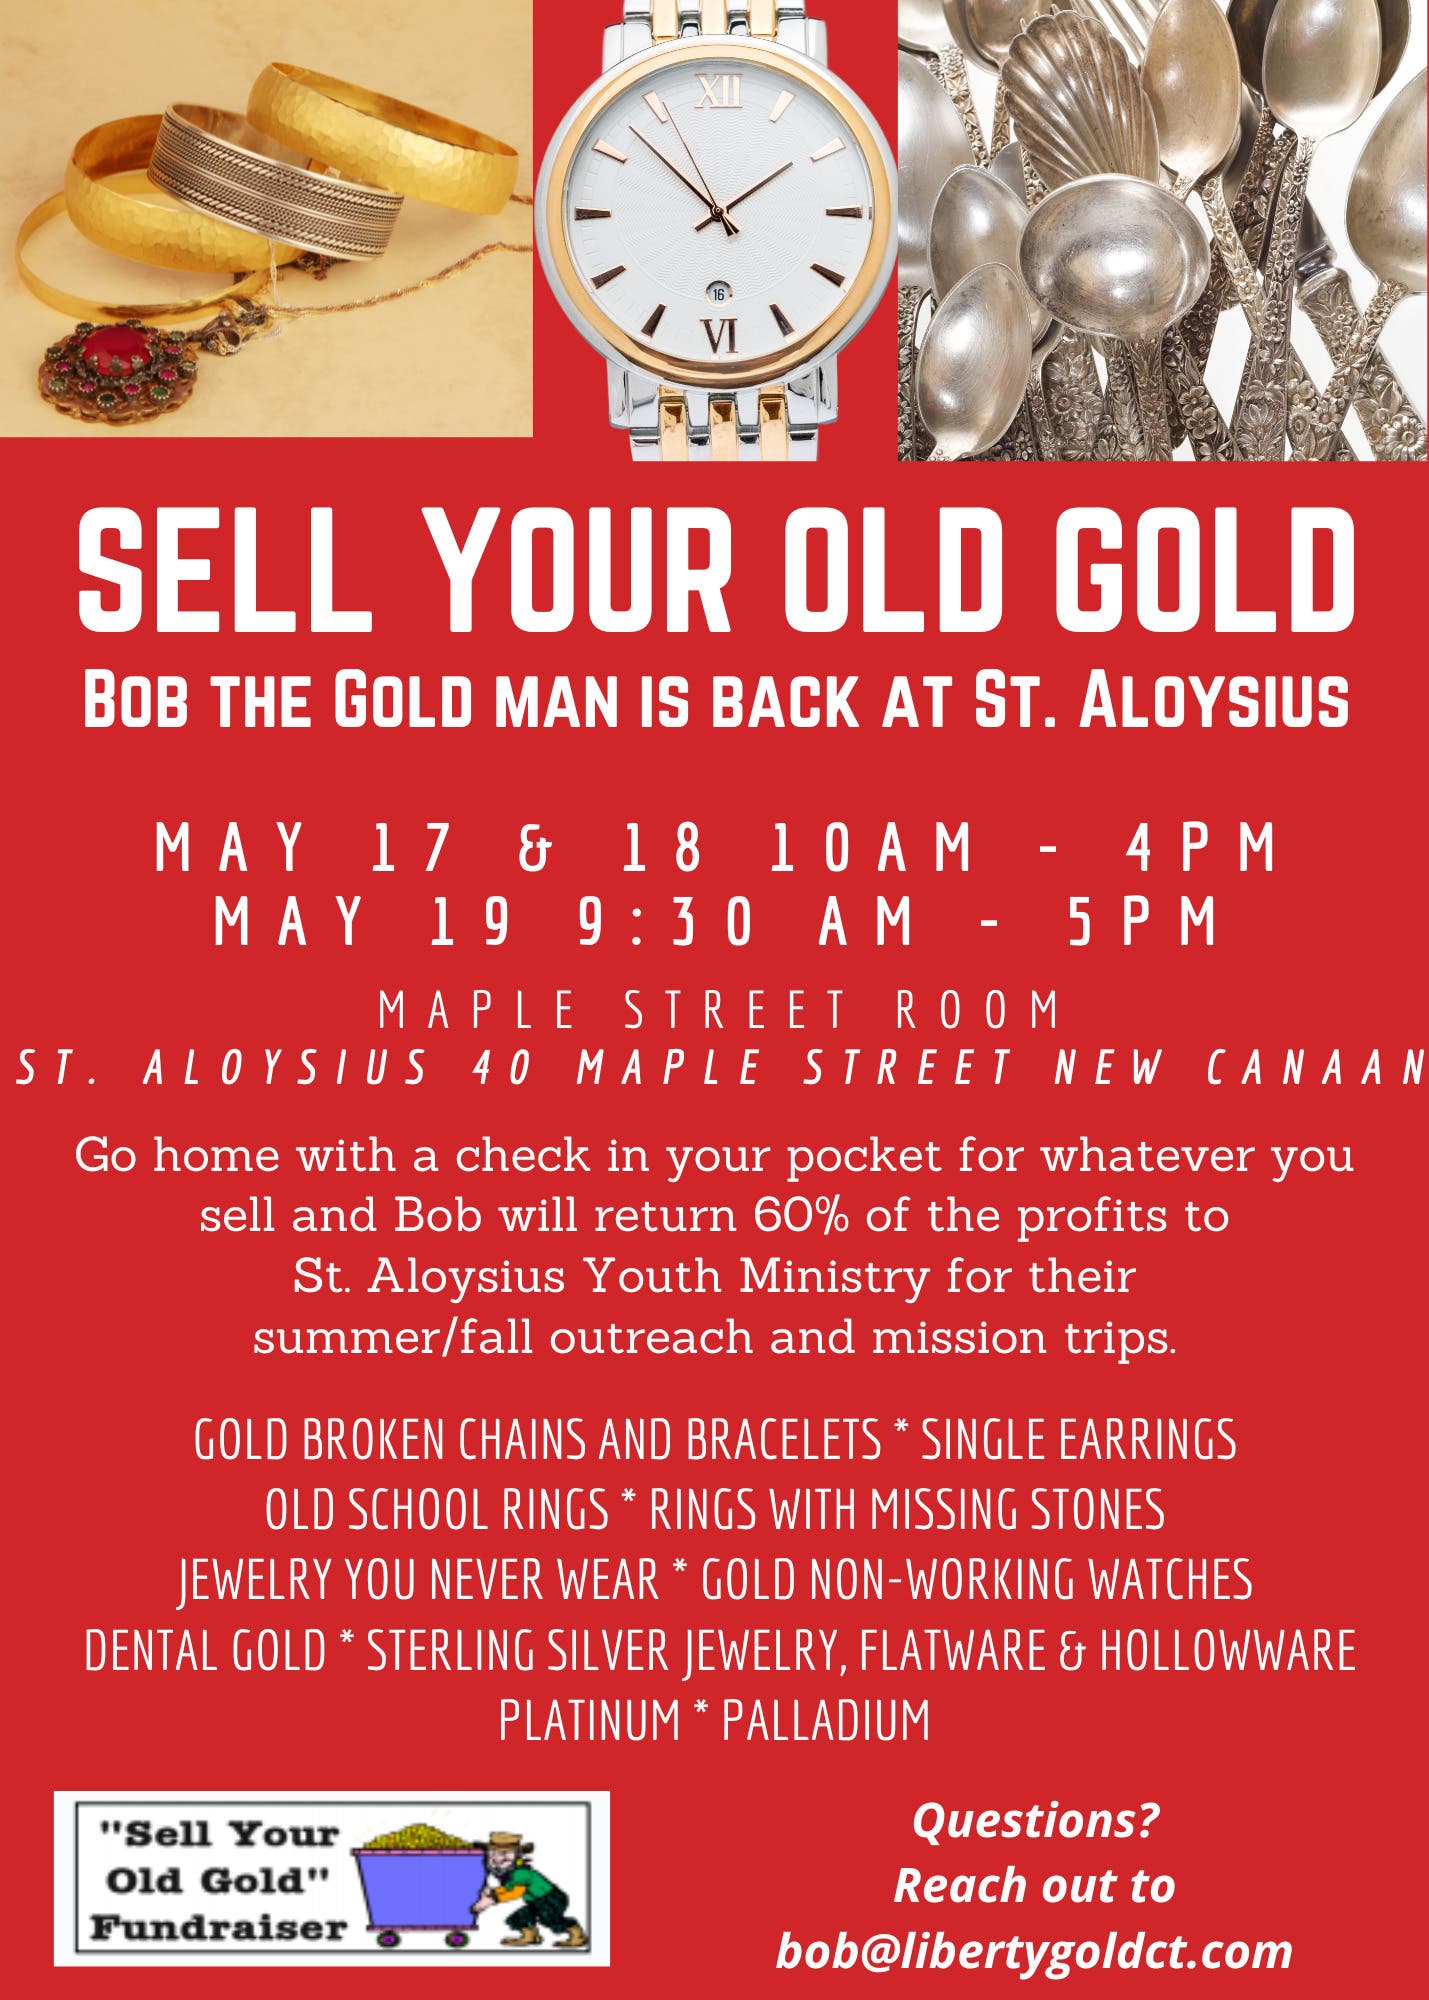 Bob the Goldman "Sell Your Old Gold" Sale